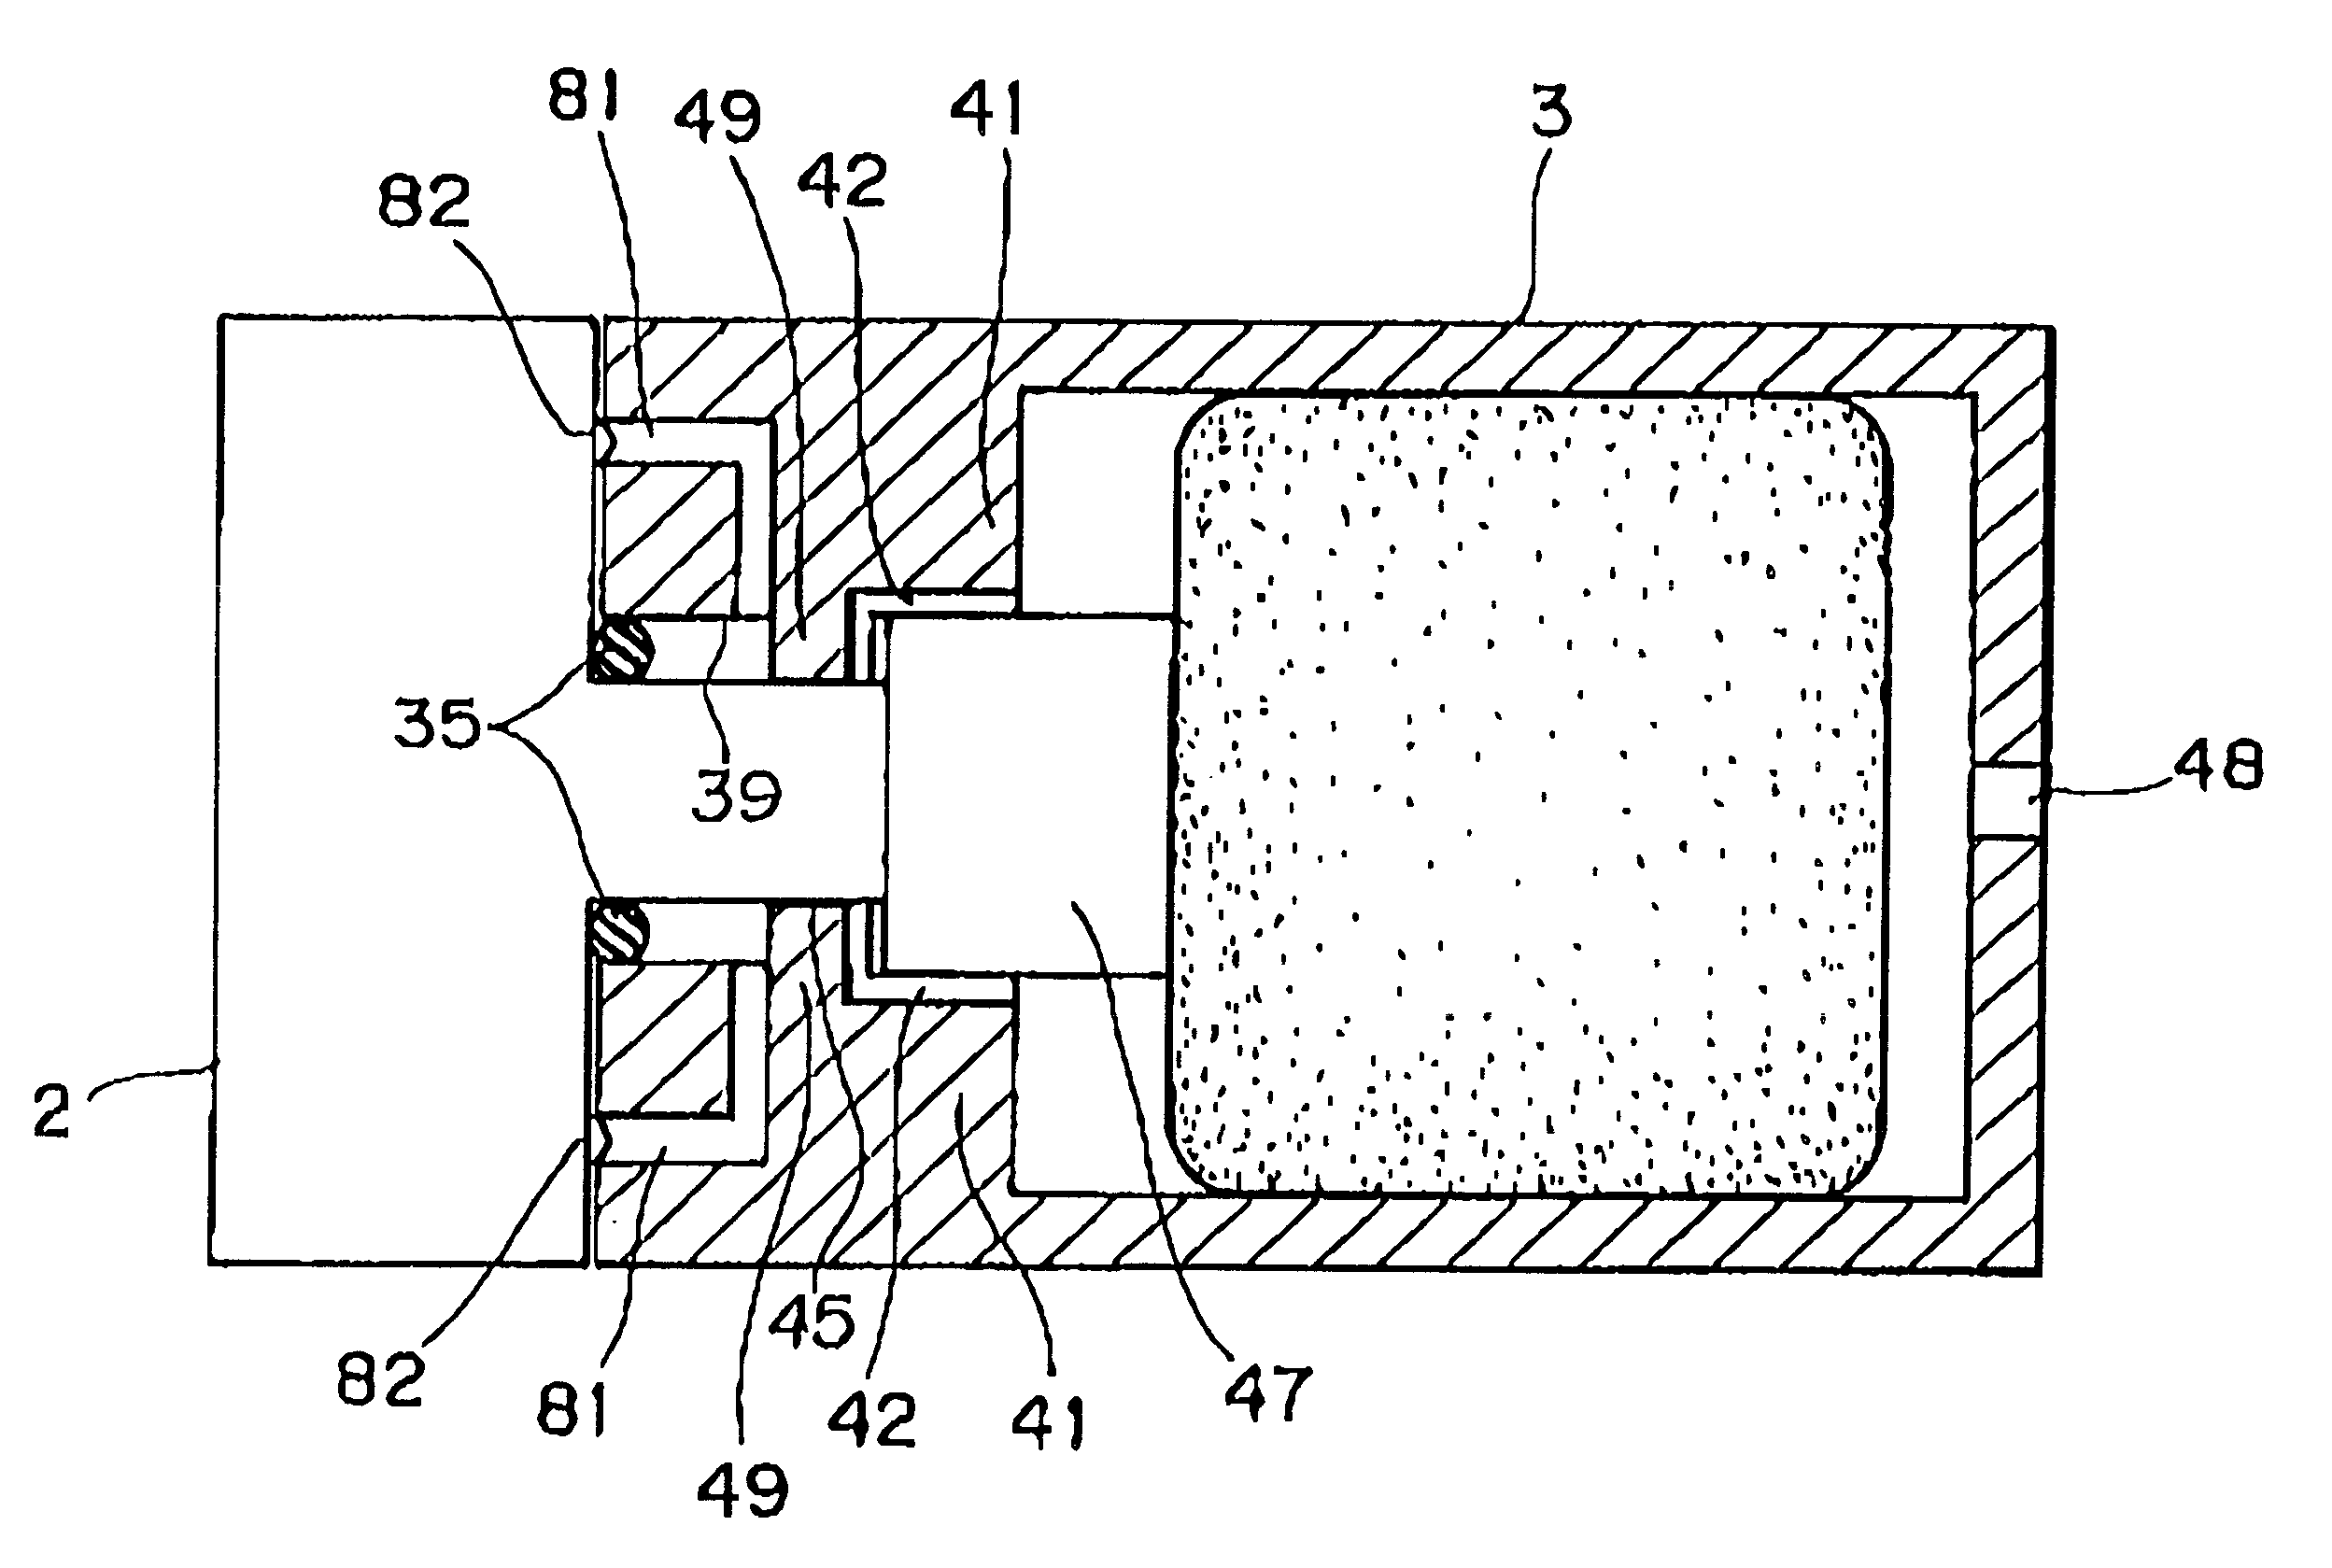 Ink jet recording apparatus using recording unit with ink cartridge having ink inducing element